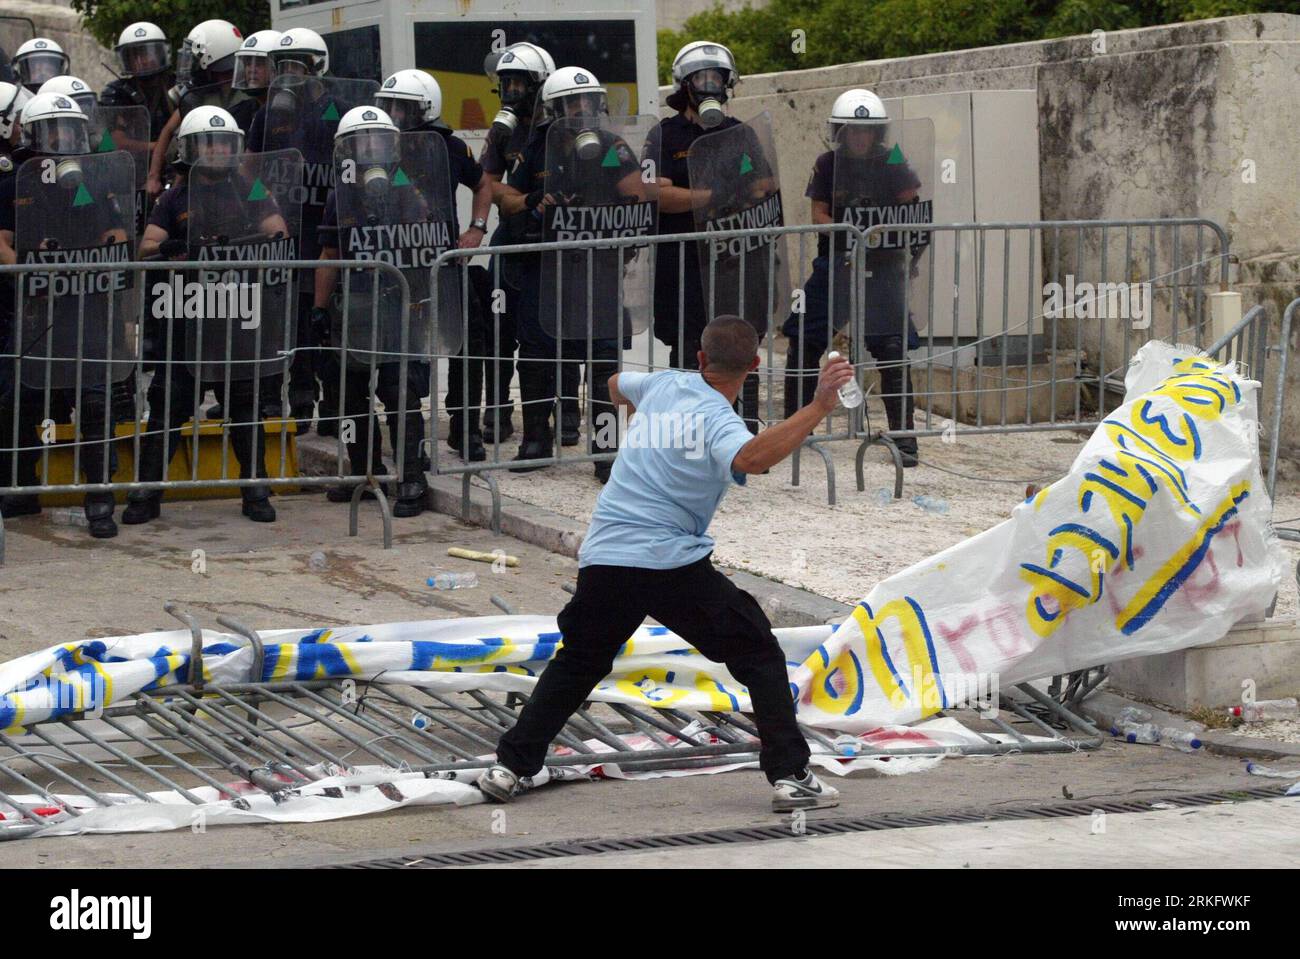 Bildnummer: 55460679  Datum: 15.06.2011  Copyright: imago/Xinhua (110615) -- ATHENS, June 15, 2011 (Xinhua) -- A demonstrator throws a bottle at anti-riot policemen at the Constitution Square in Athens, Greece, June 15, 2011. A new 24-hour nationwide general strike hit Greece Wednesday in protest at further austerity measures planned by the Greek government to counter its acute debt crisis. (Xinhua/Marios Lolos) (wjd) GREECE-AUSTERITY MEASURES-PROTEST PUBLICATIONxNOTxINxCHN Politik Proteste GRE x0x xkg 2011 quer     Bildnummer 55460679 Date 15 06 2011 Copyright Imago XINHUA  Athens June 15 201 Stock Photo